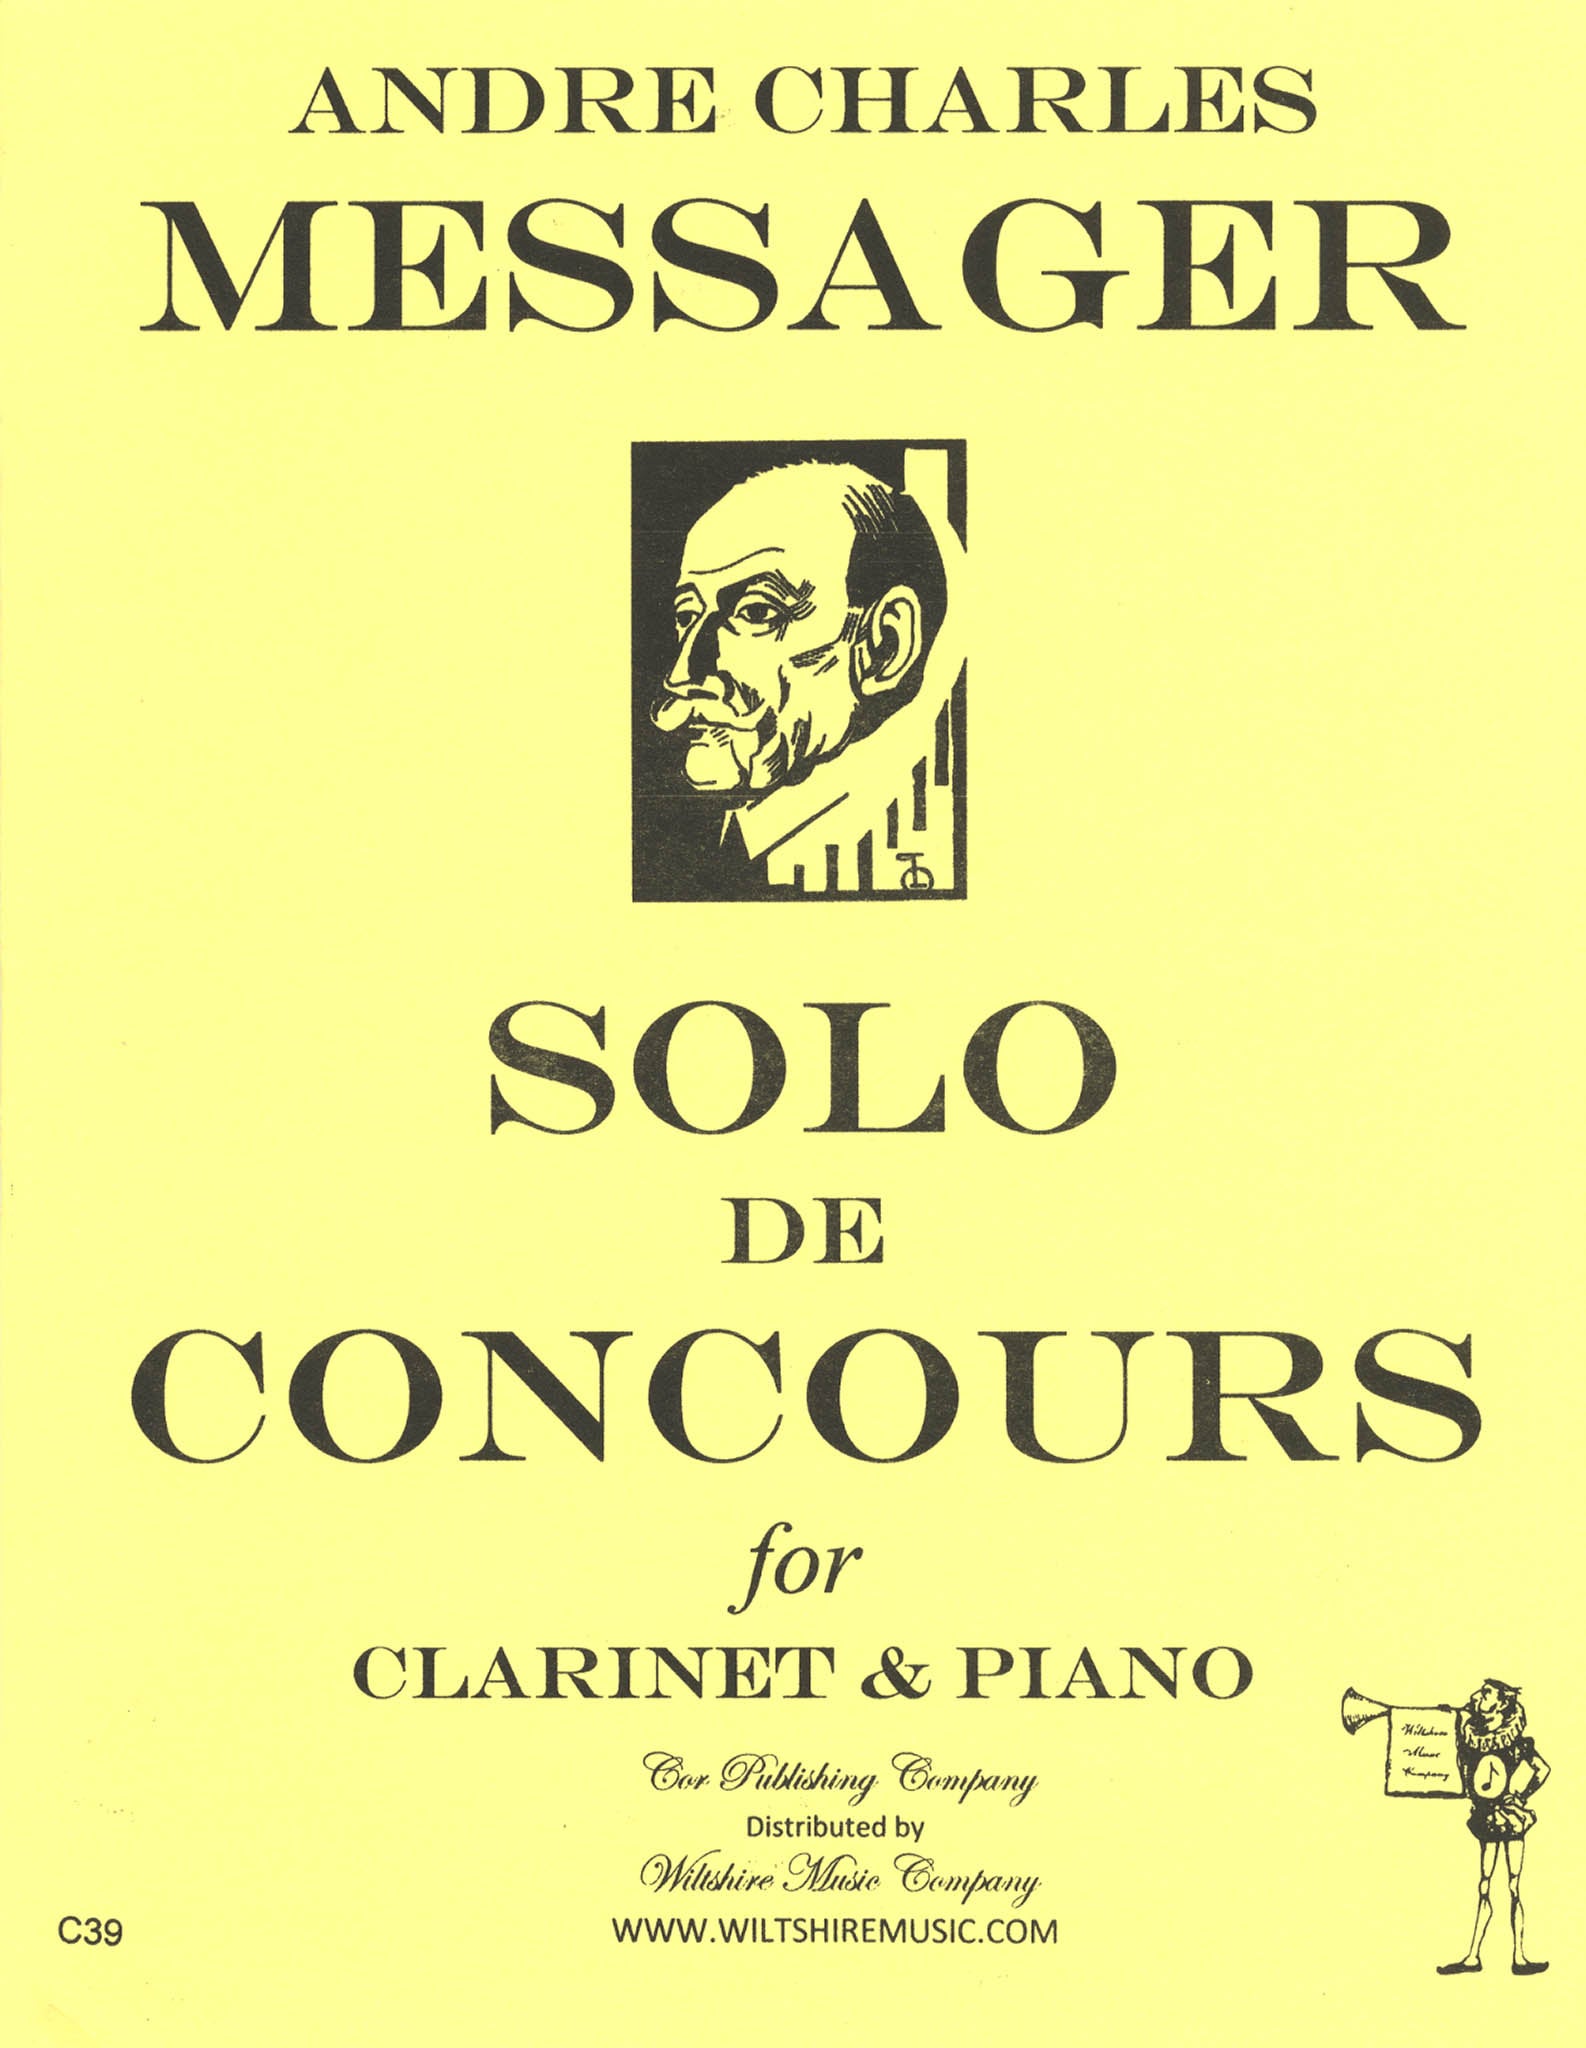 Messager Solo de concours for Clarinet & Piano Cover